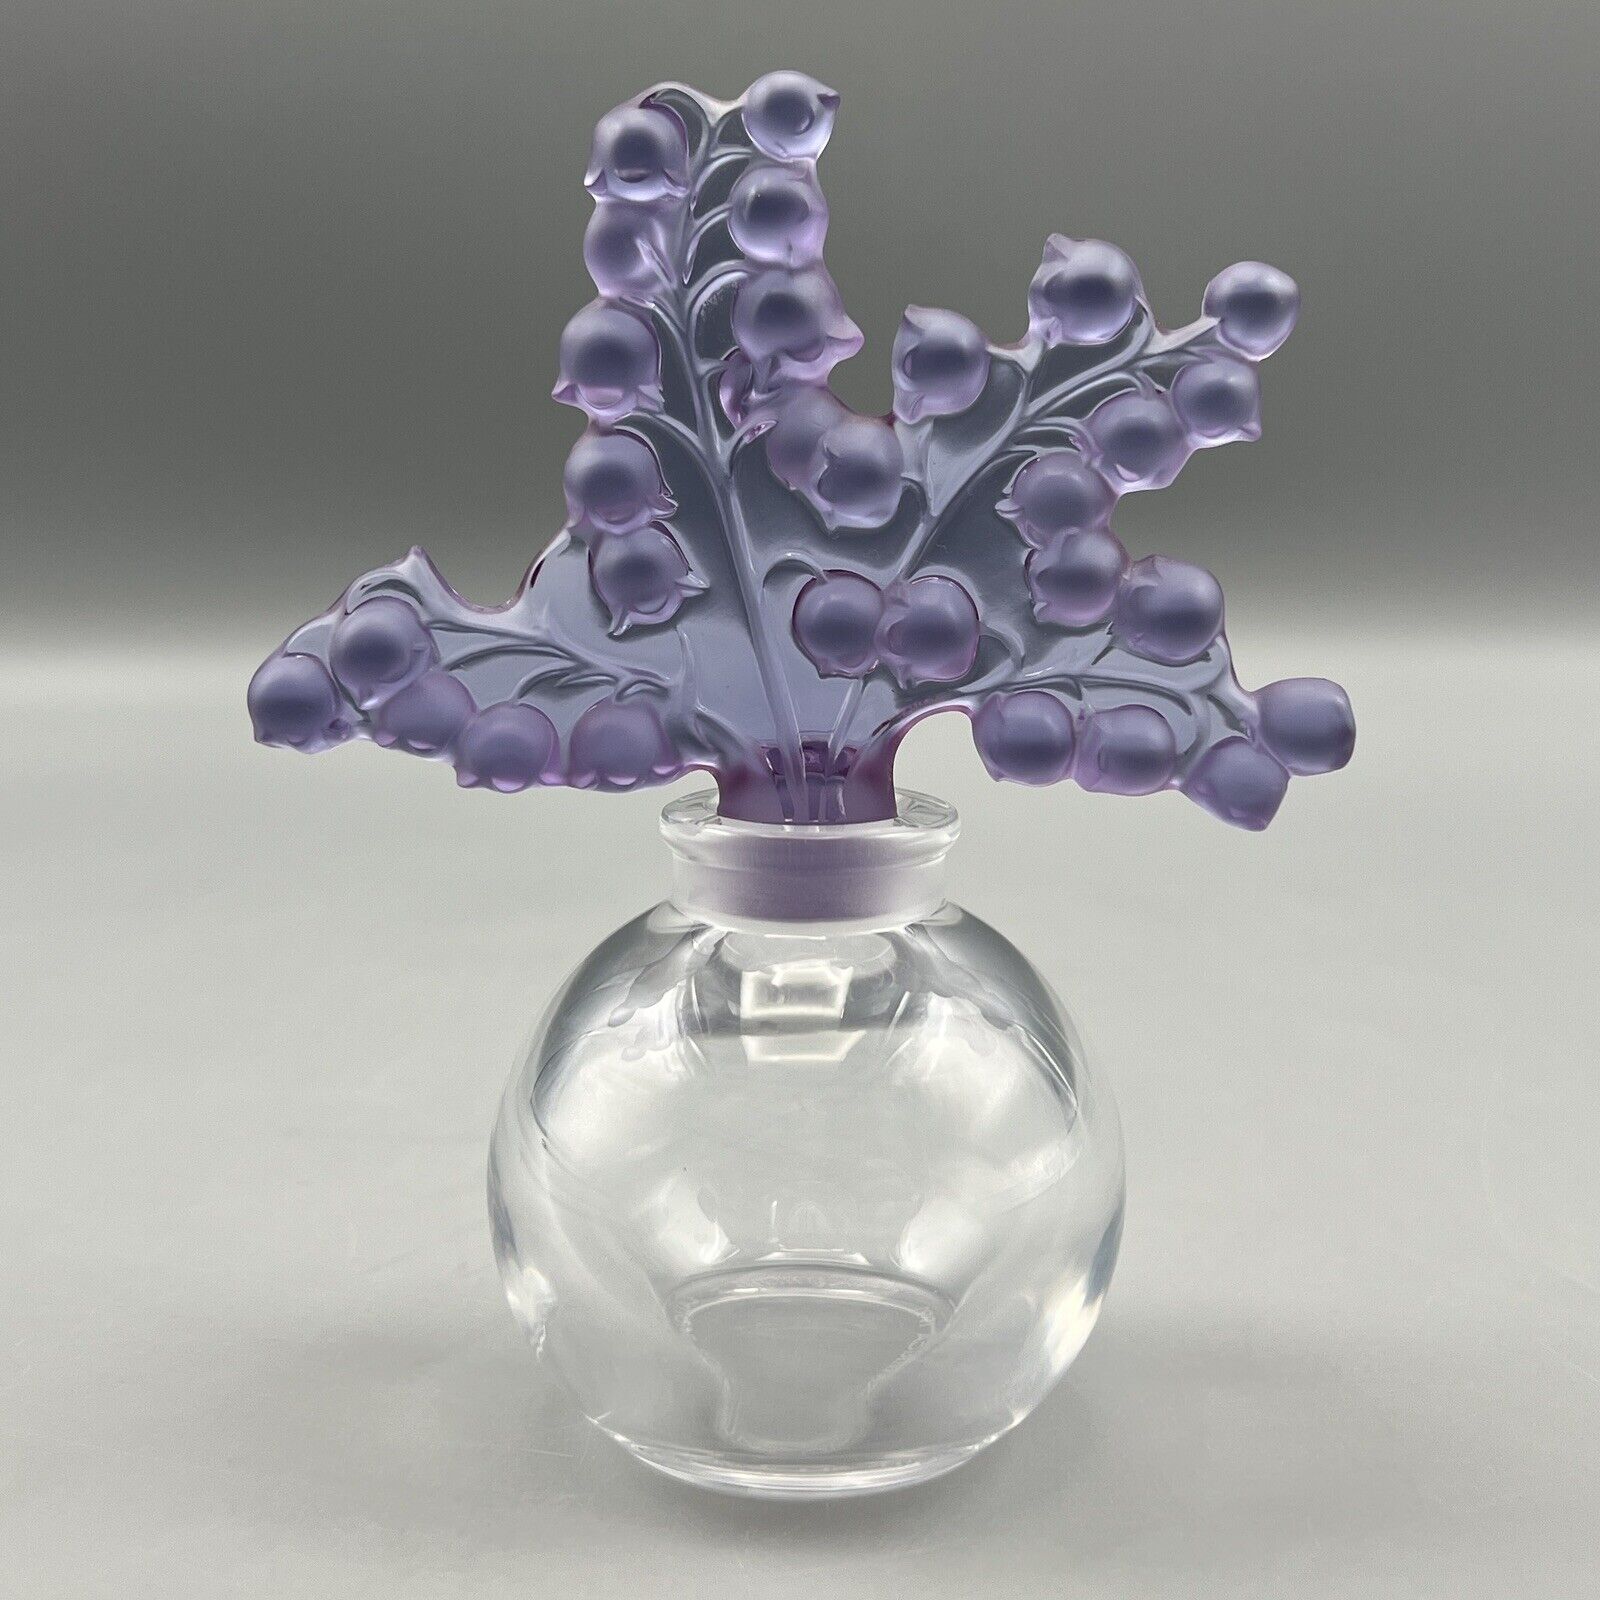 Lalique Clairefontaine 1991 Perfume Bottle Society Amethyst Lily Lavender